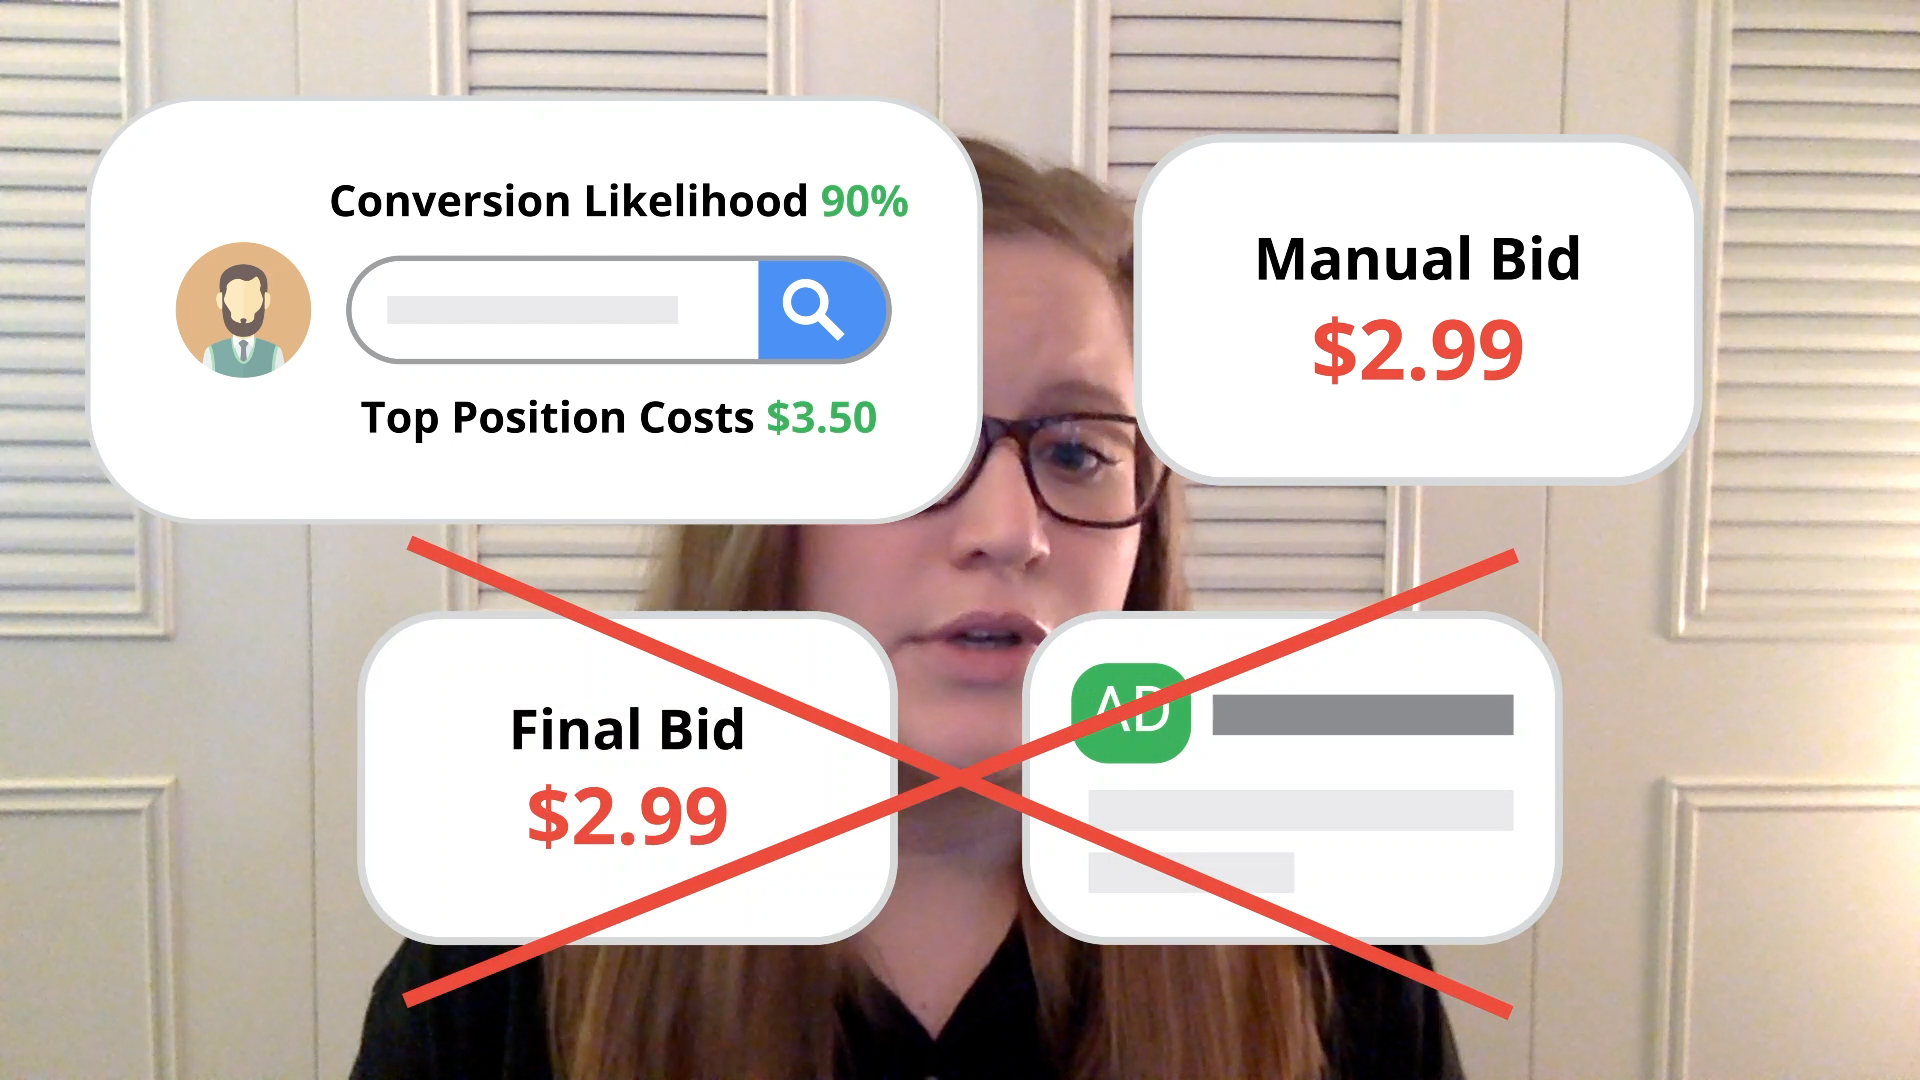 high-level diagram showing how manual bidding on Google can allow you to miss opportunities in the ad auction if your bid is too low